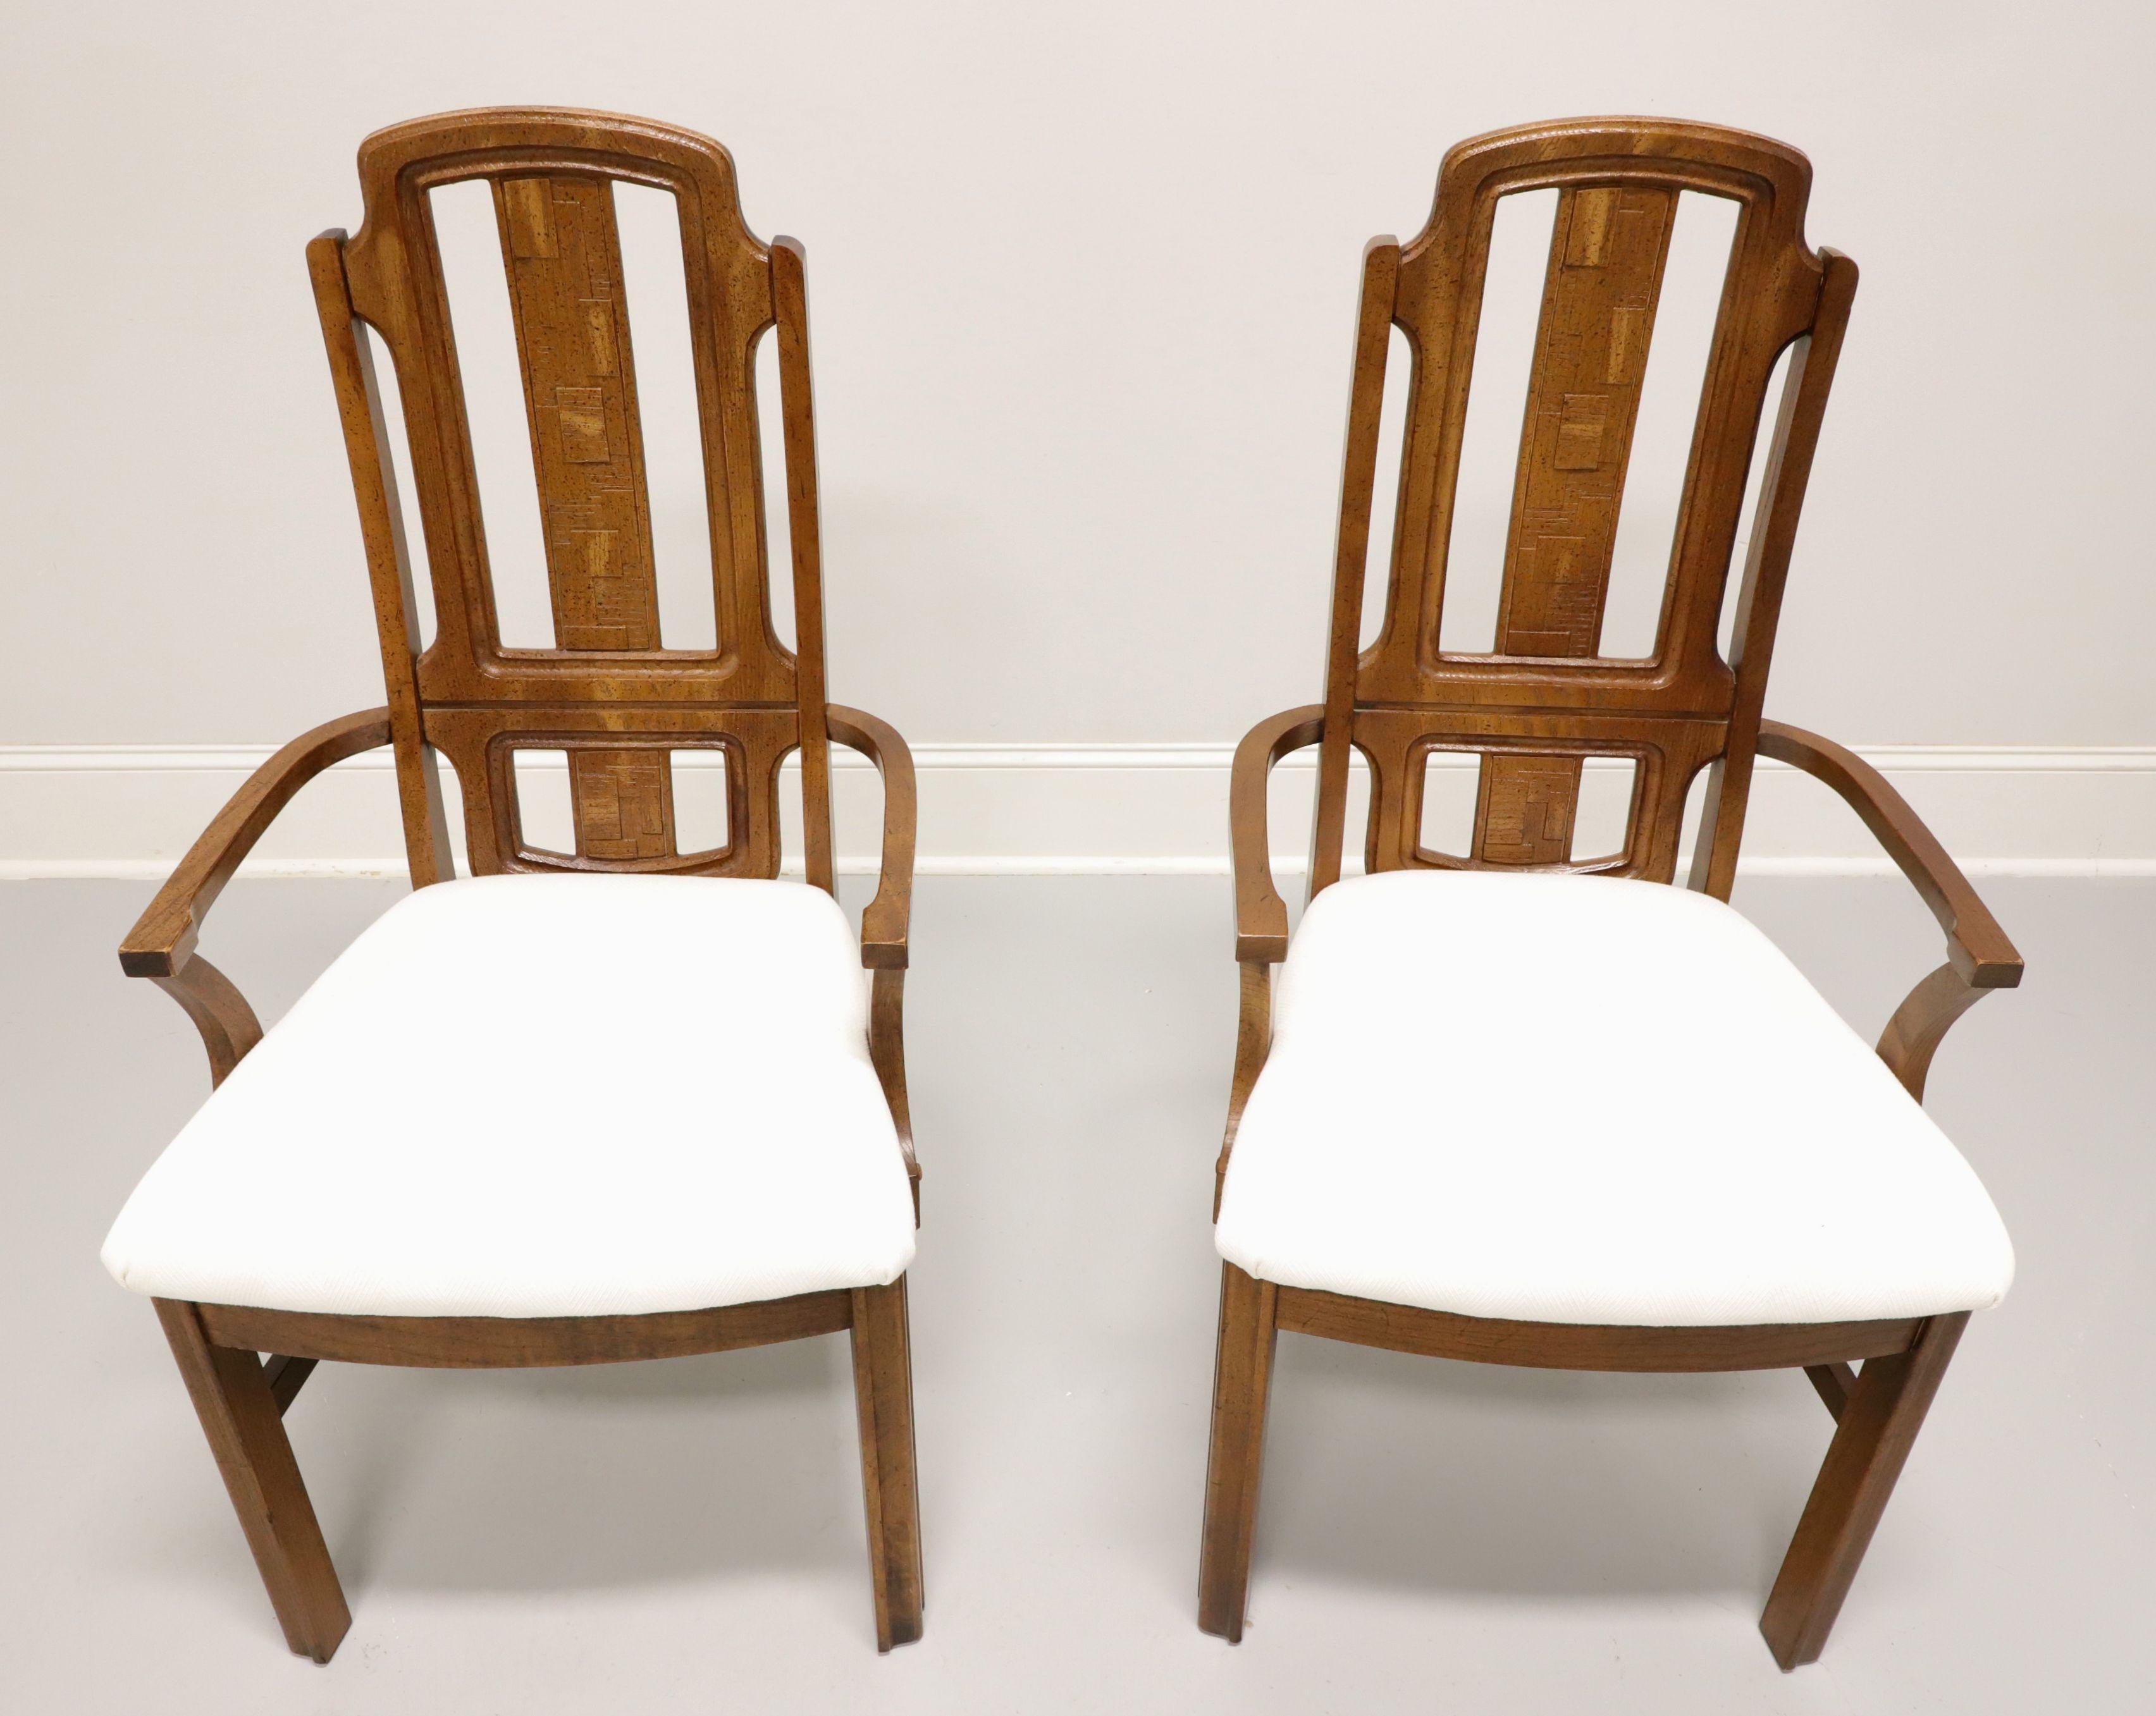 A pair of Mid 20th century Brutalist style dining armchairs by Broyhill Premier. Oak with slightly distressed finish, arched crestrail, raised & textured geometric design to backrest, gently curved arms with arched supports, neutral cream color